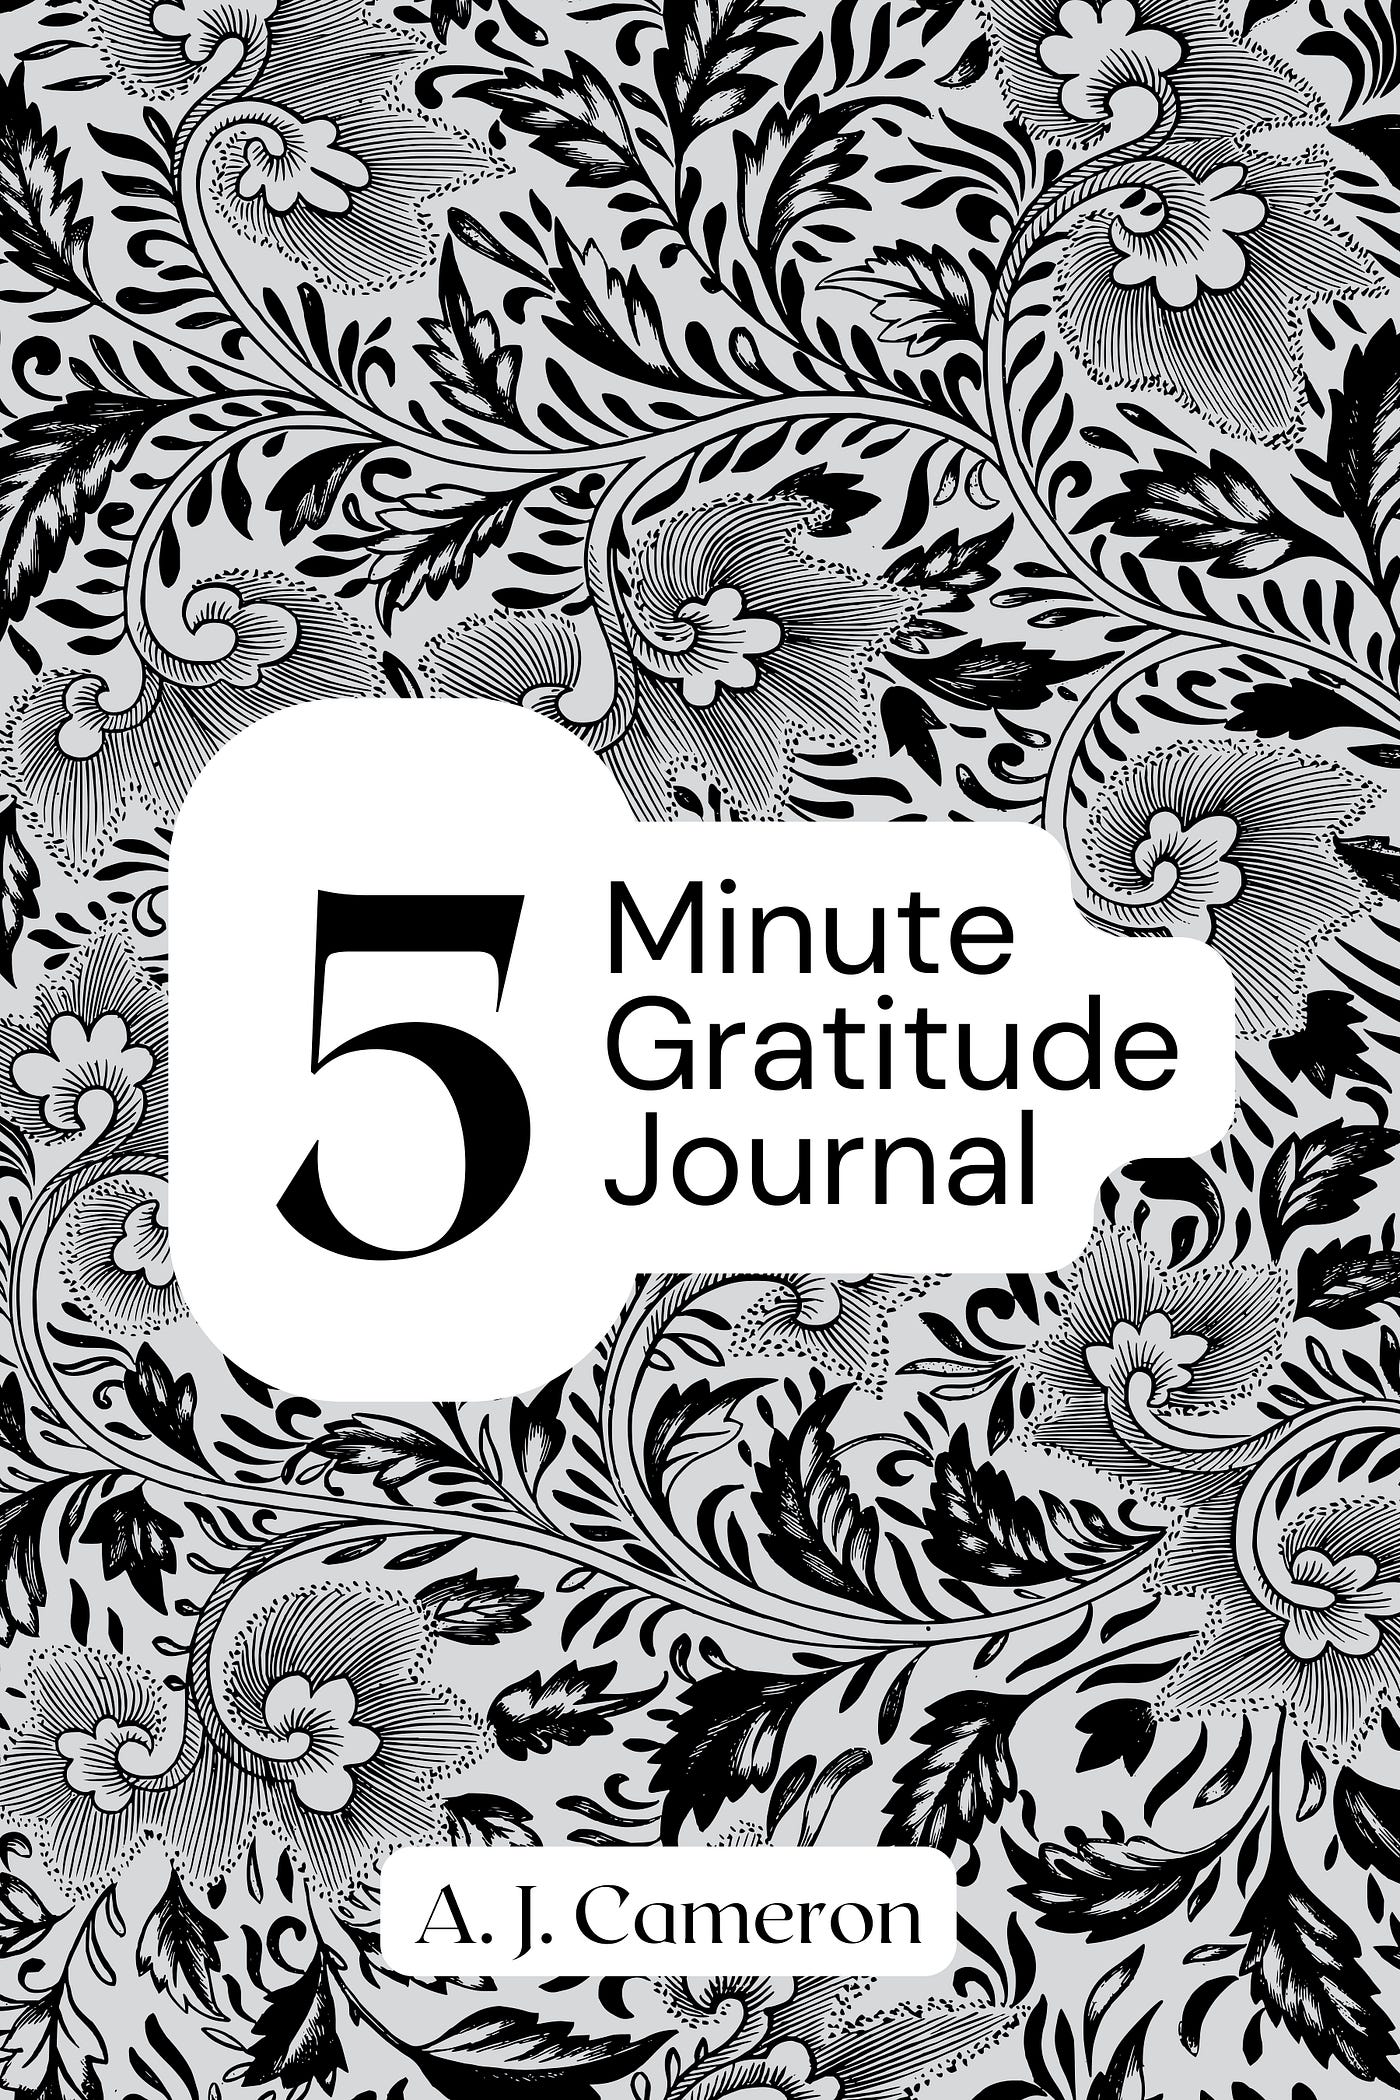 Gratitude Journal for Women: Daily 5 Minute Mindfulness